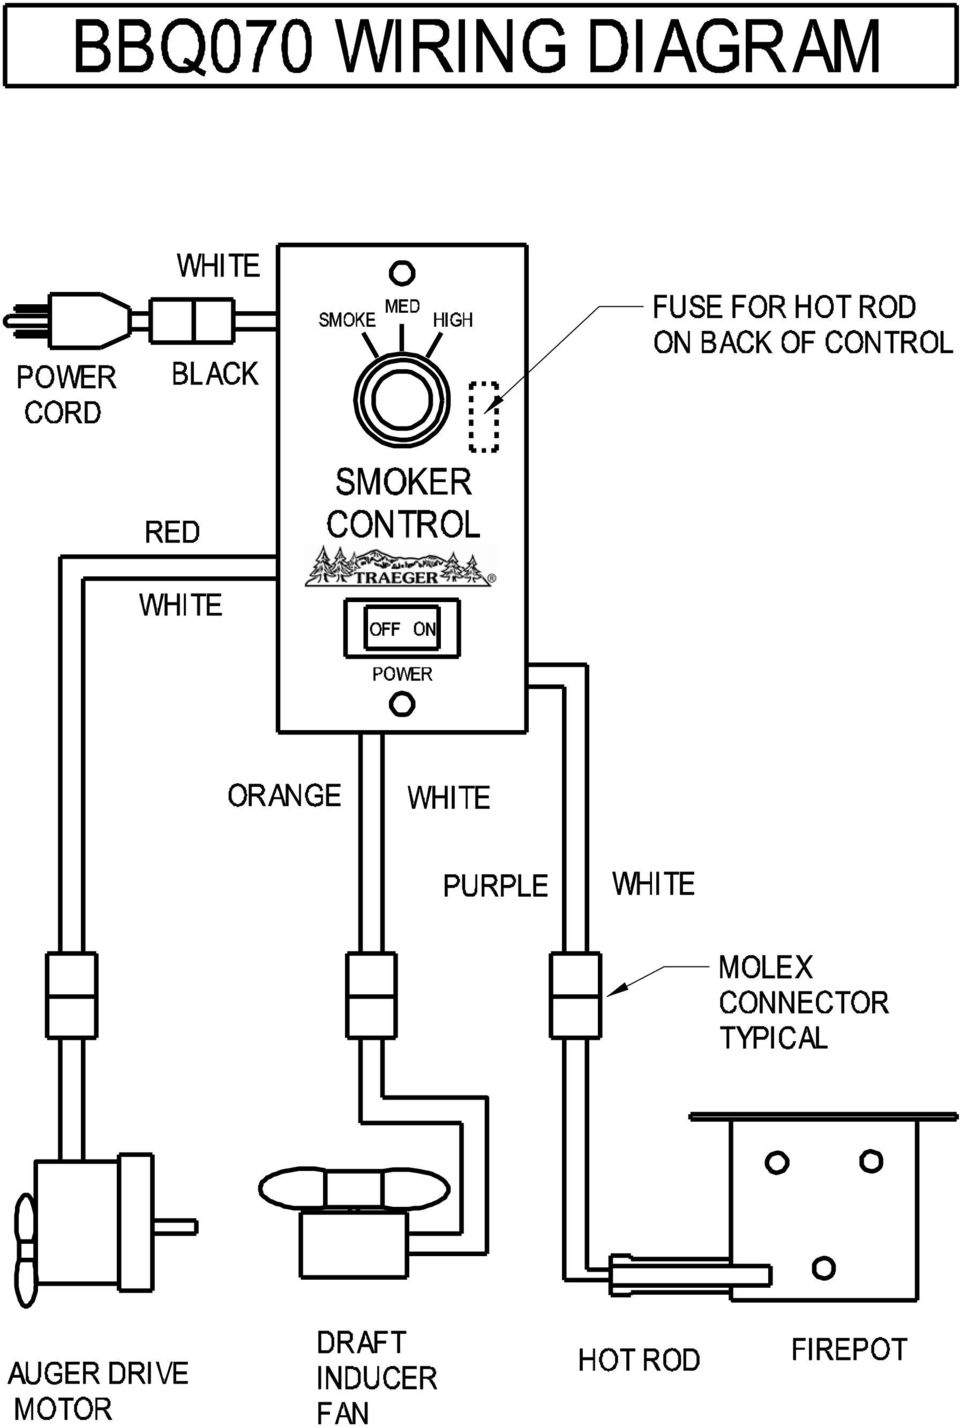 OWNER S MANUAL BBQ070 - PDF Free Download  Traeger Smoker Control Wiring Diagram    DocPlayer.net